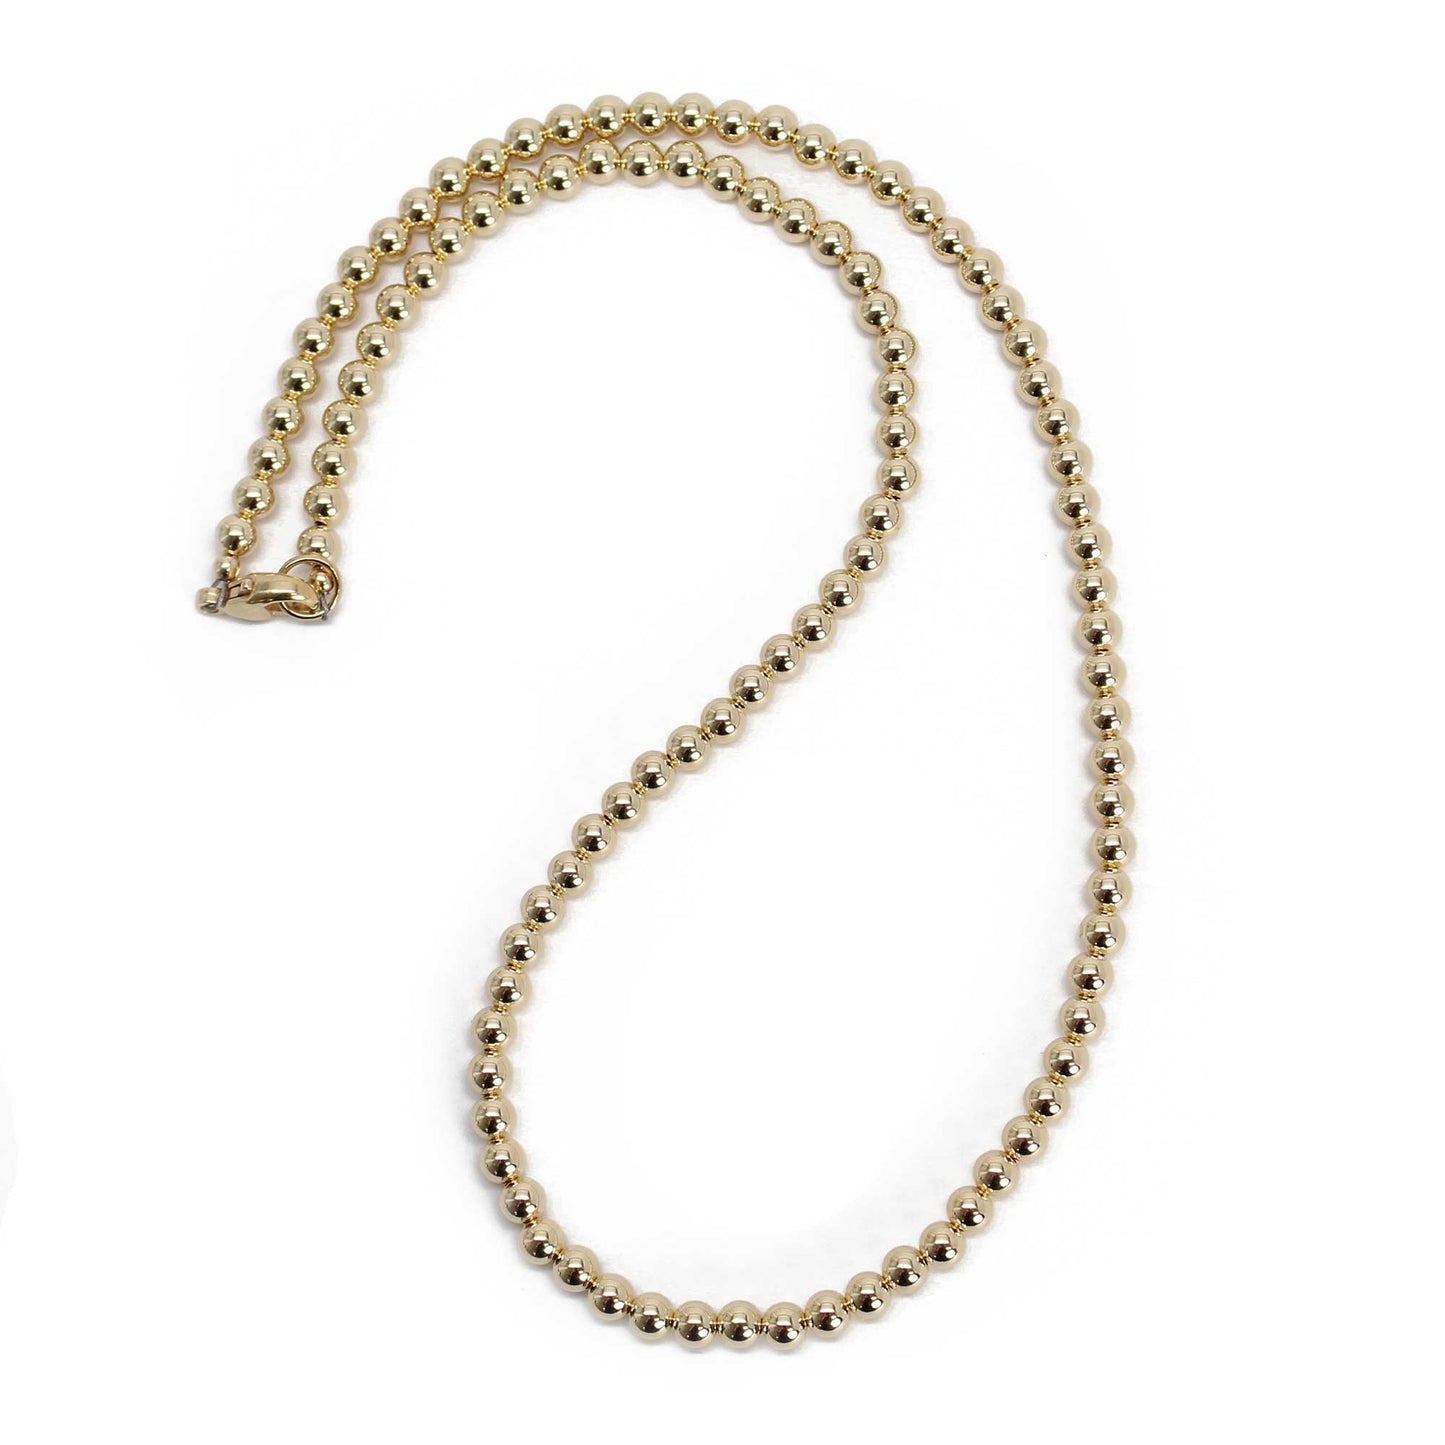 4mm Yellow Gold Filled Bead Necklace Strand – Kathy Bankston